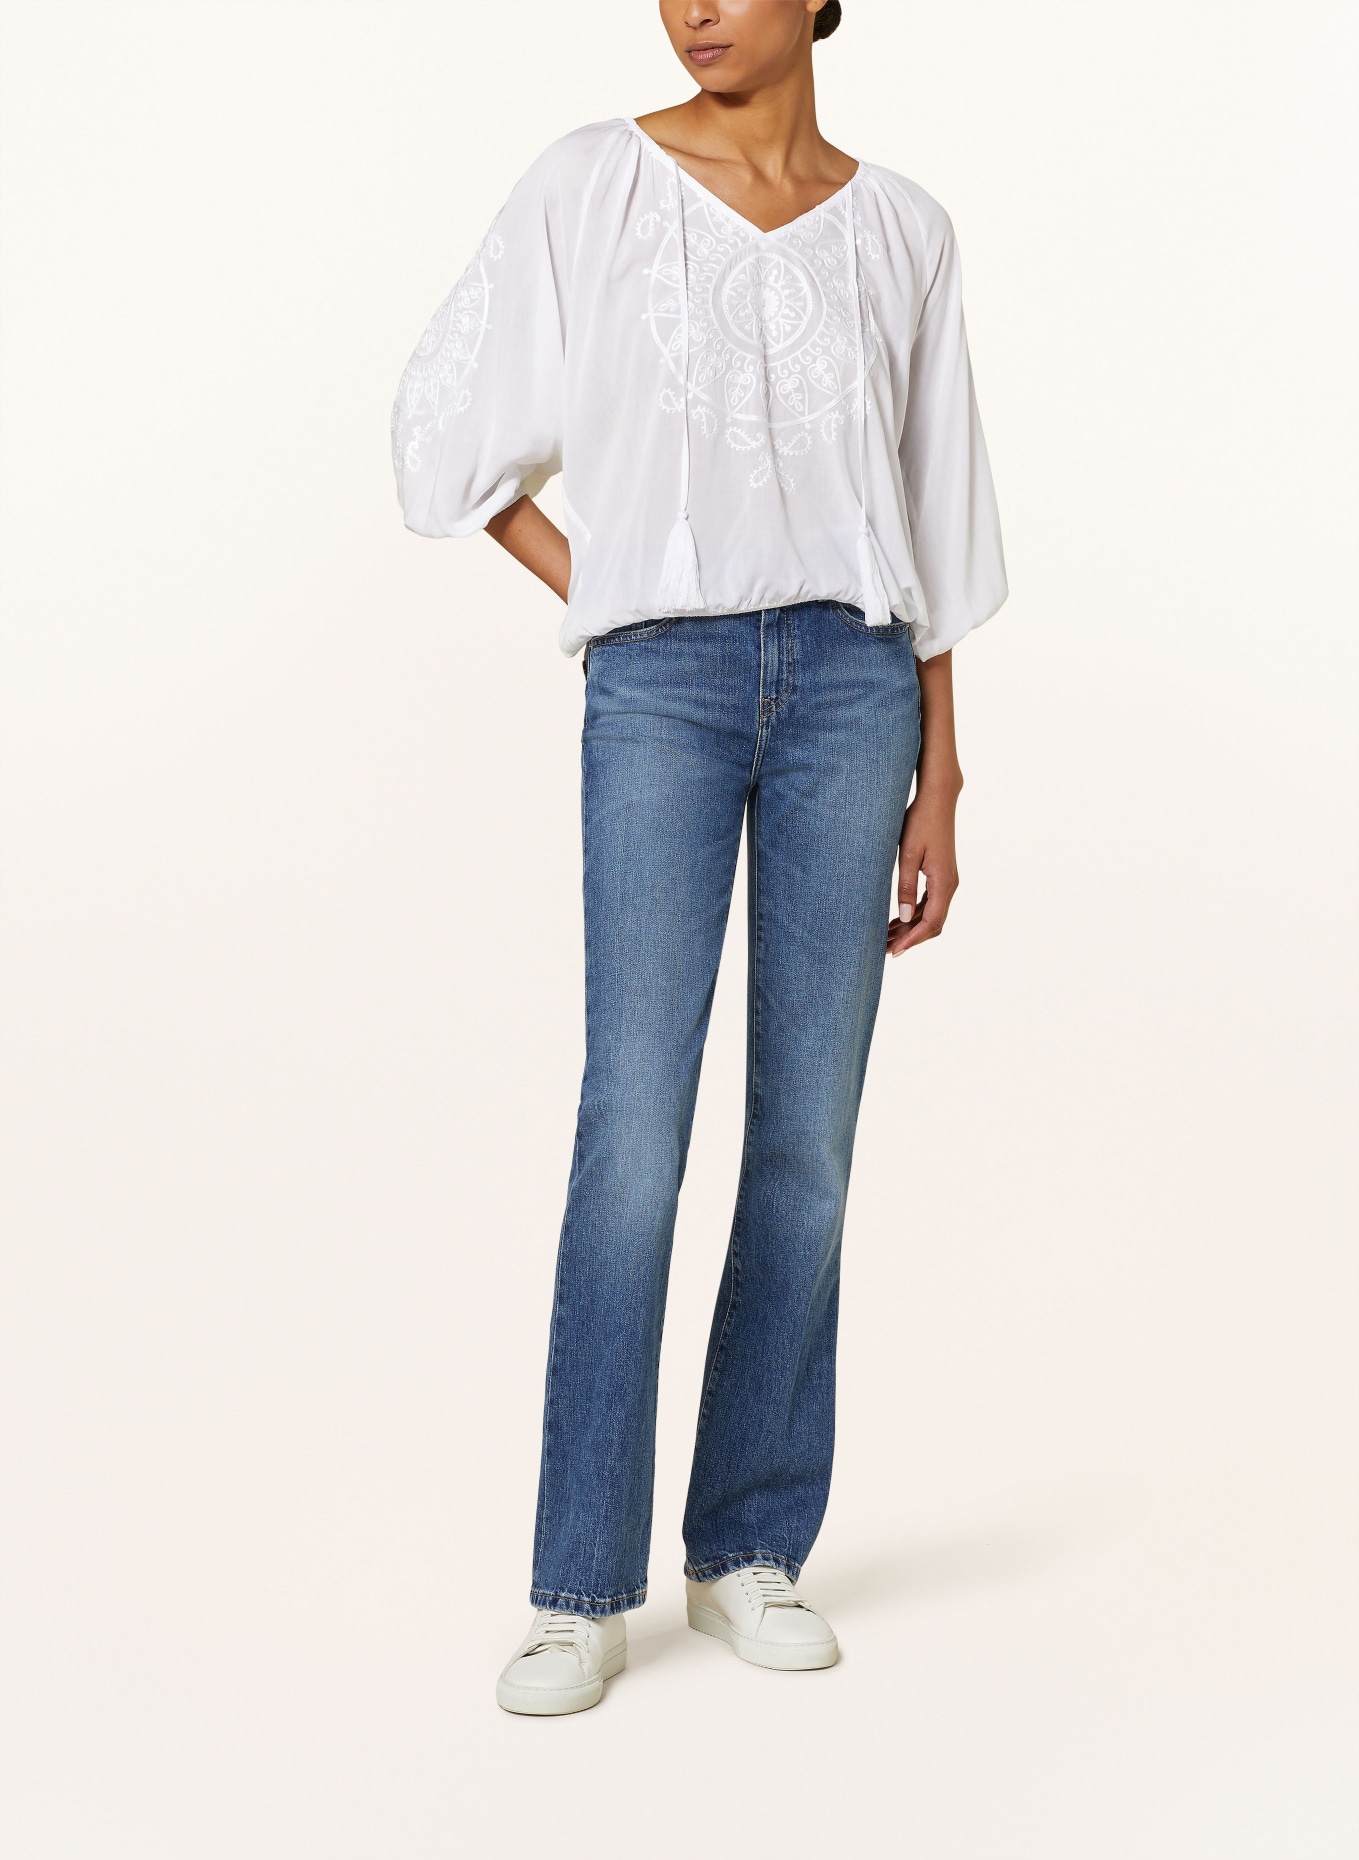 monari Shirt blouse with 3/4 sleeves, Color: WHITE (Image 2)